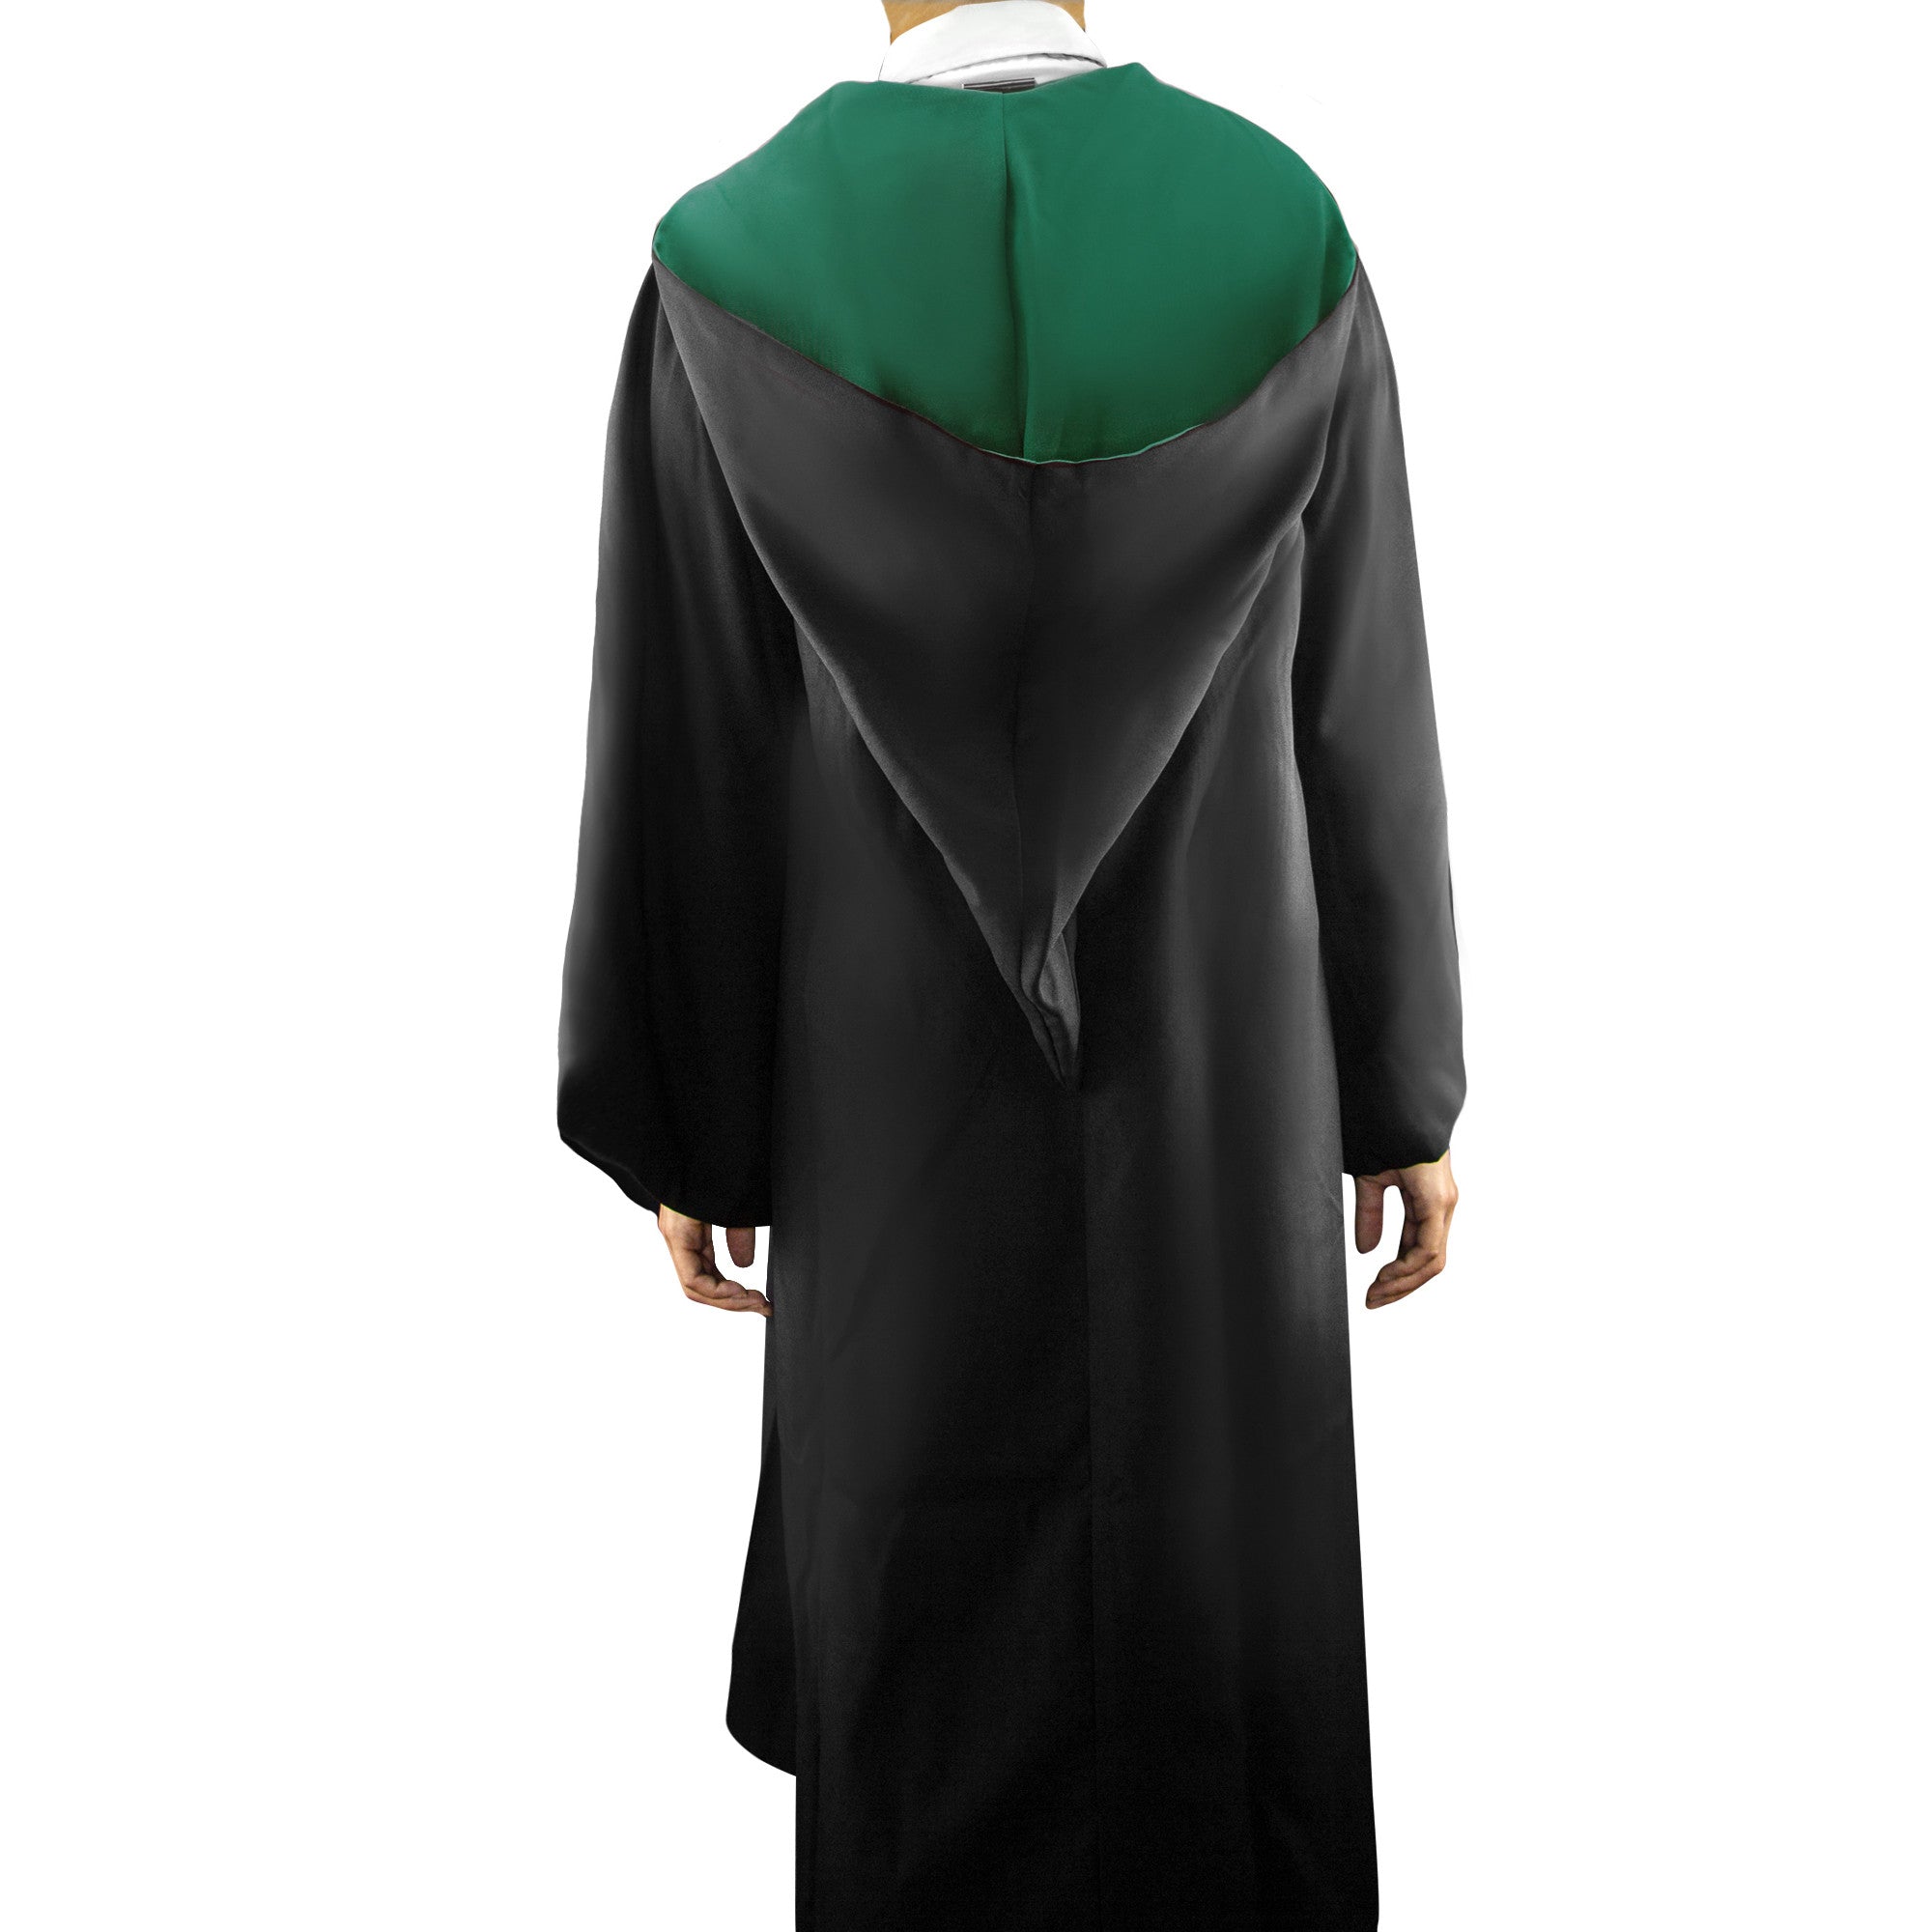 Slytherin Robe Adult Costume – Party Paradise